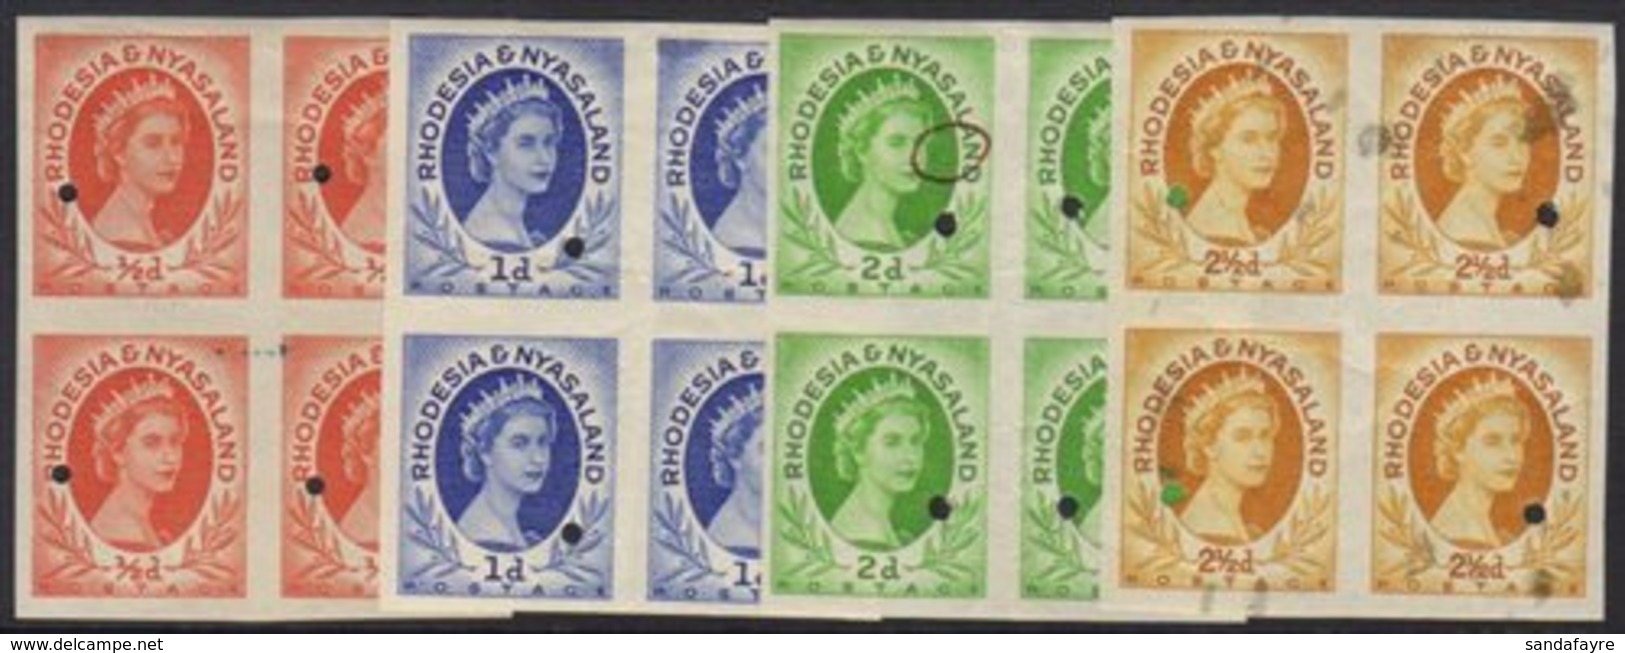 1954-56 Imperf Plate Proof Blocks Of Four ½d, 1d, 2d And 2½d, Mint Or Never Hinged Mint, With Archive Security Punch Hol - Rodesia & Nyasaland (1954-1963)